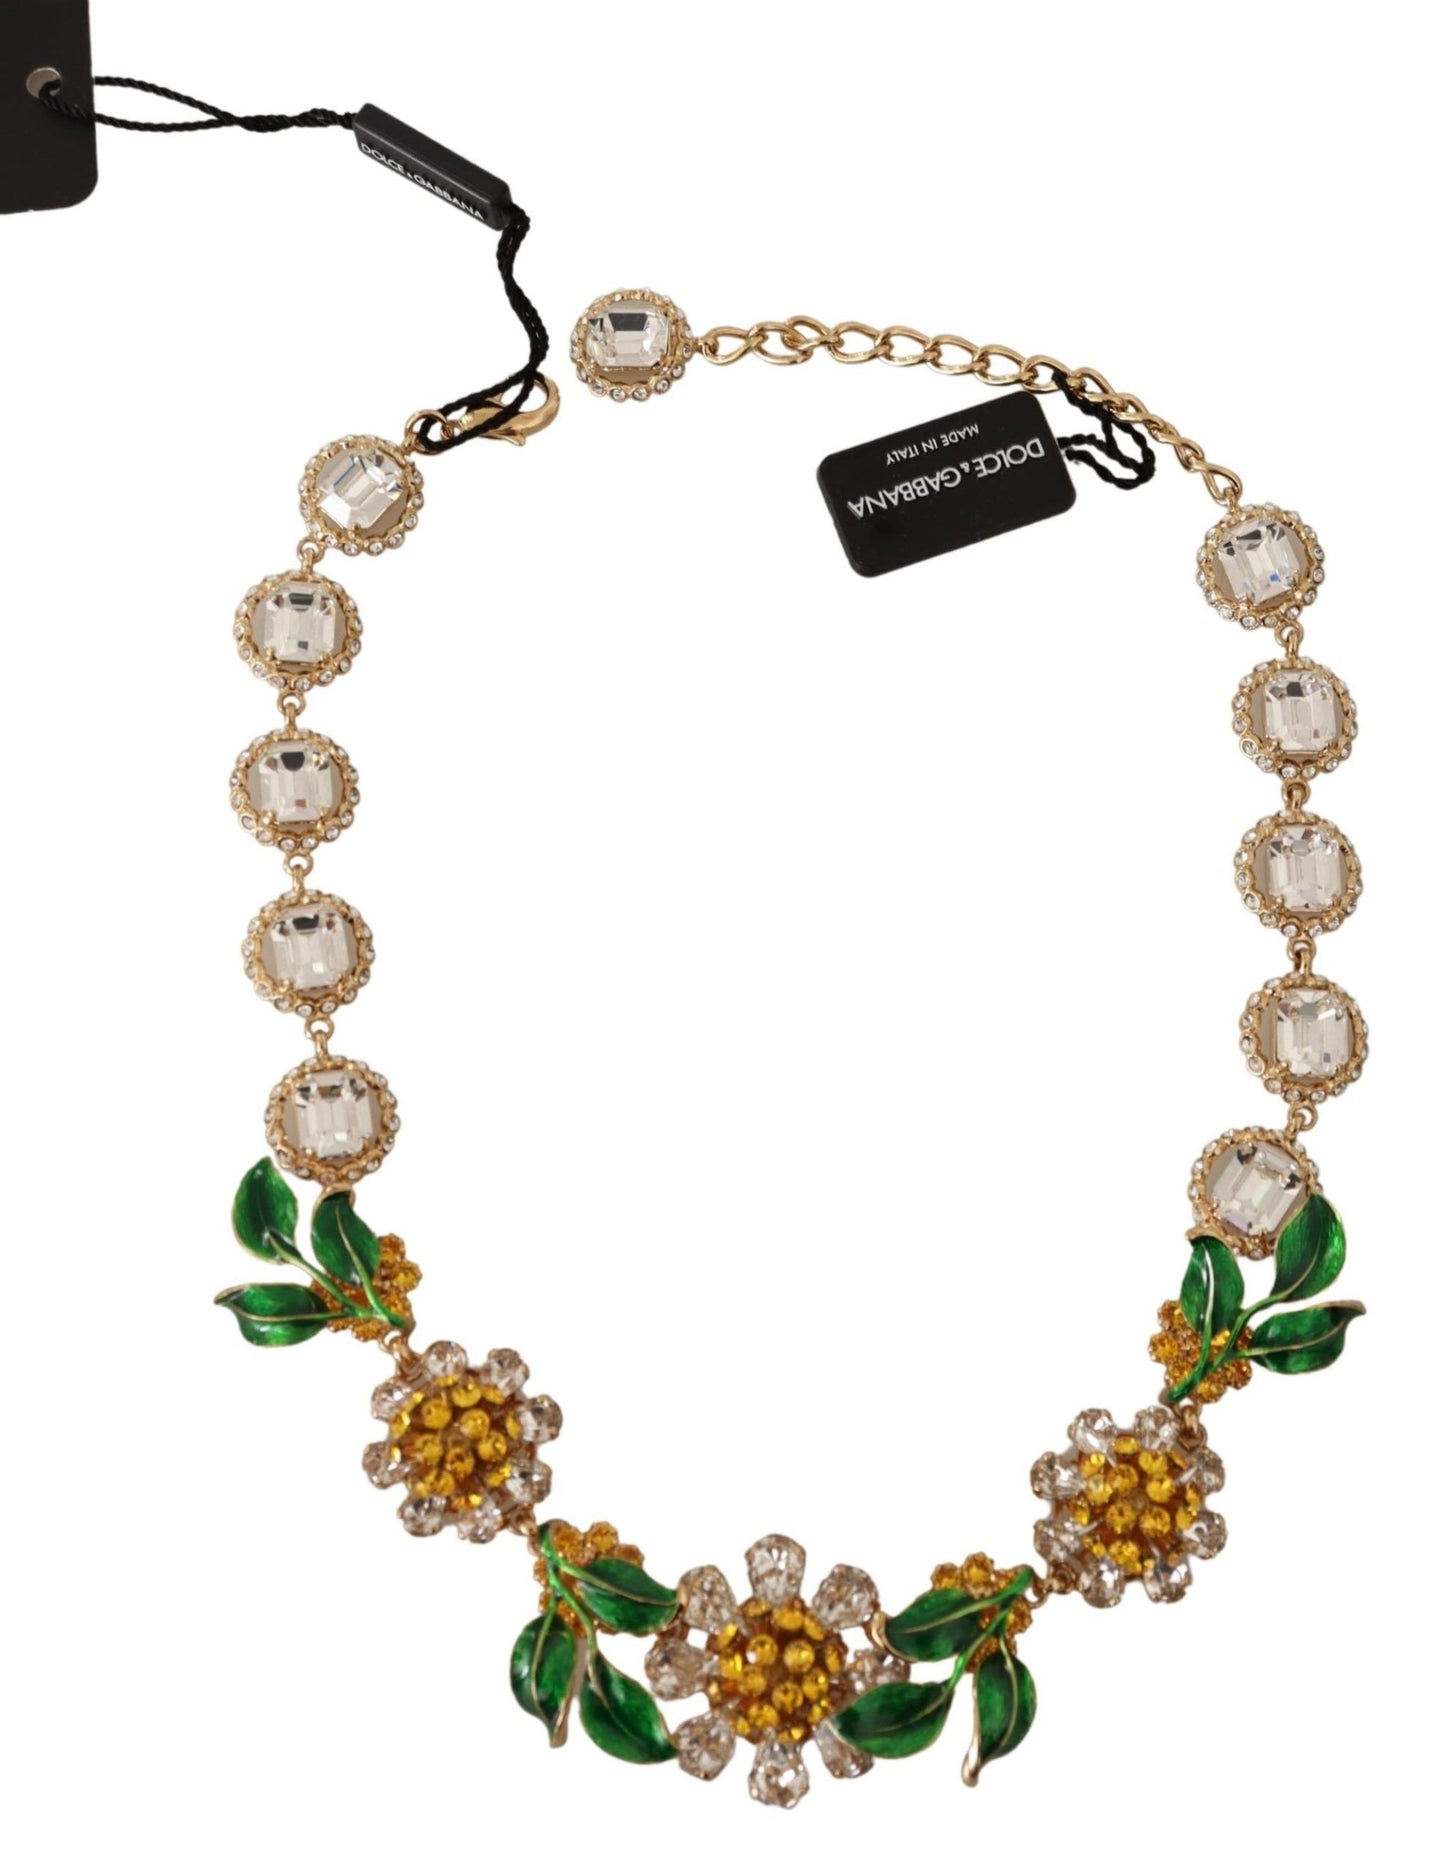 Exquisite Gold Plated Crystal Charm Necklace